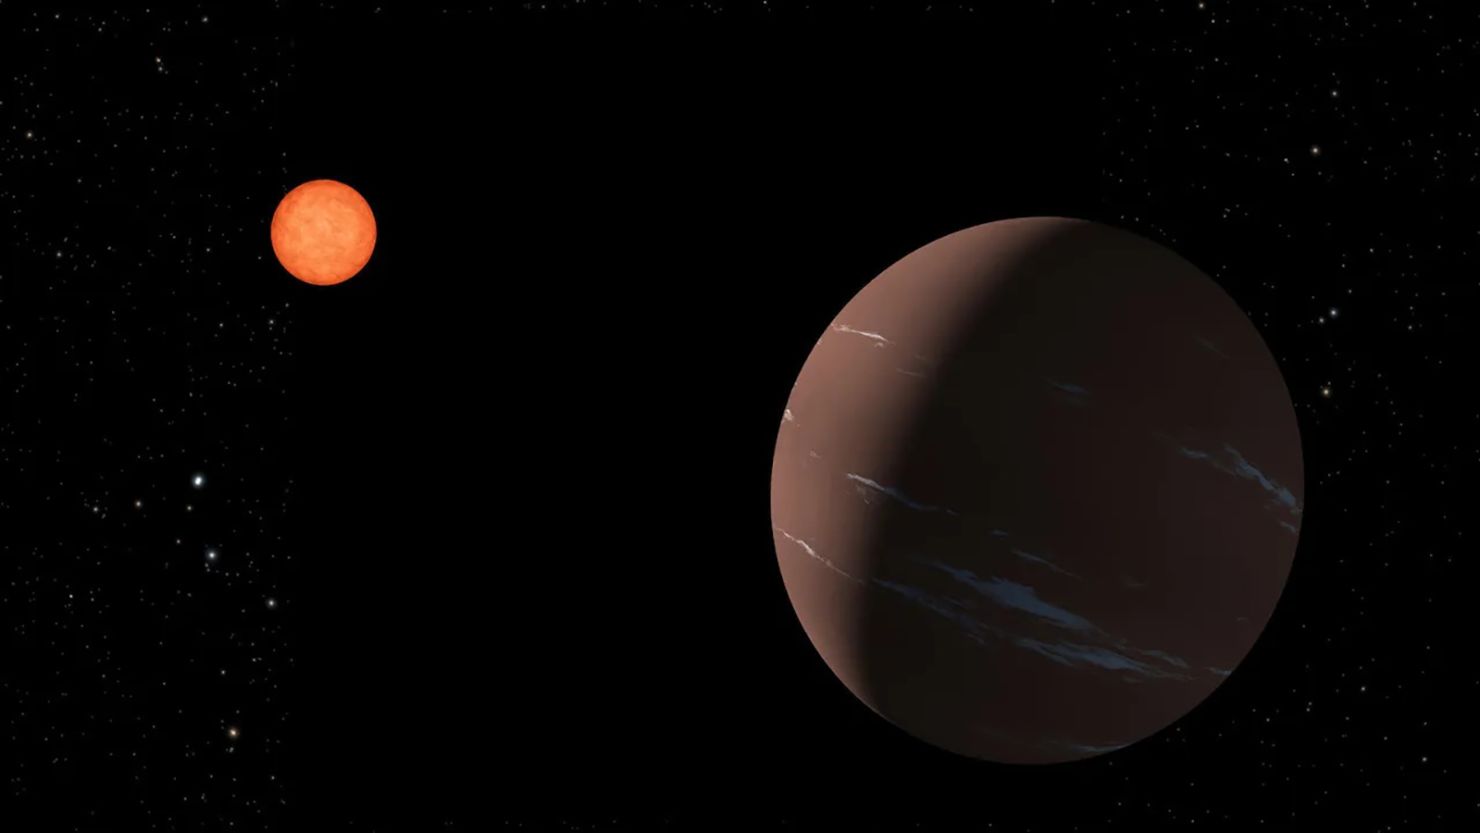 An artist's illustration depicts the 'super-Earth' exoplanet TOI-715b as it orbits within the habitable zone around a red dwarf star.